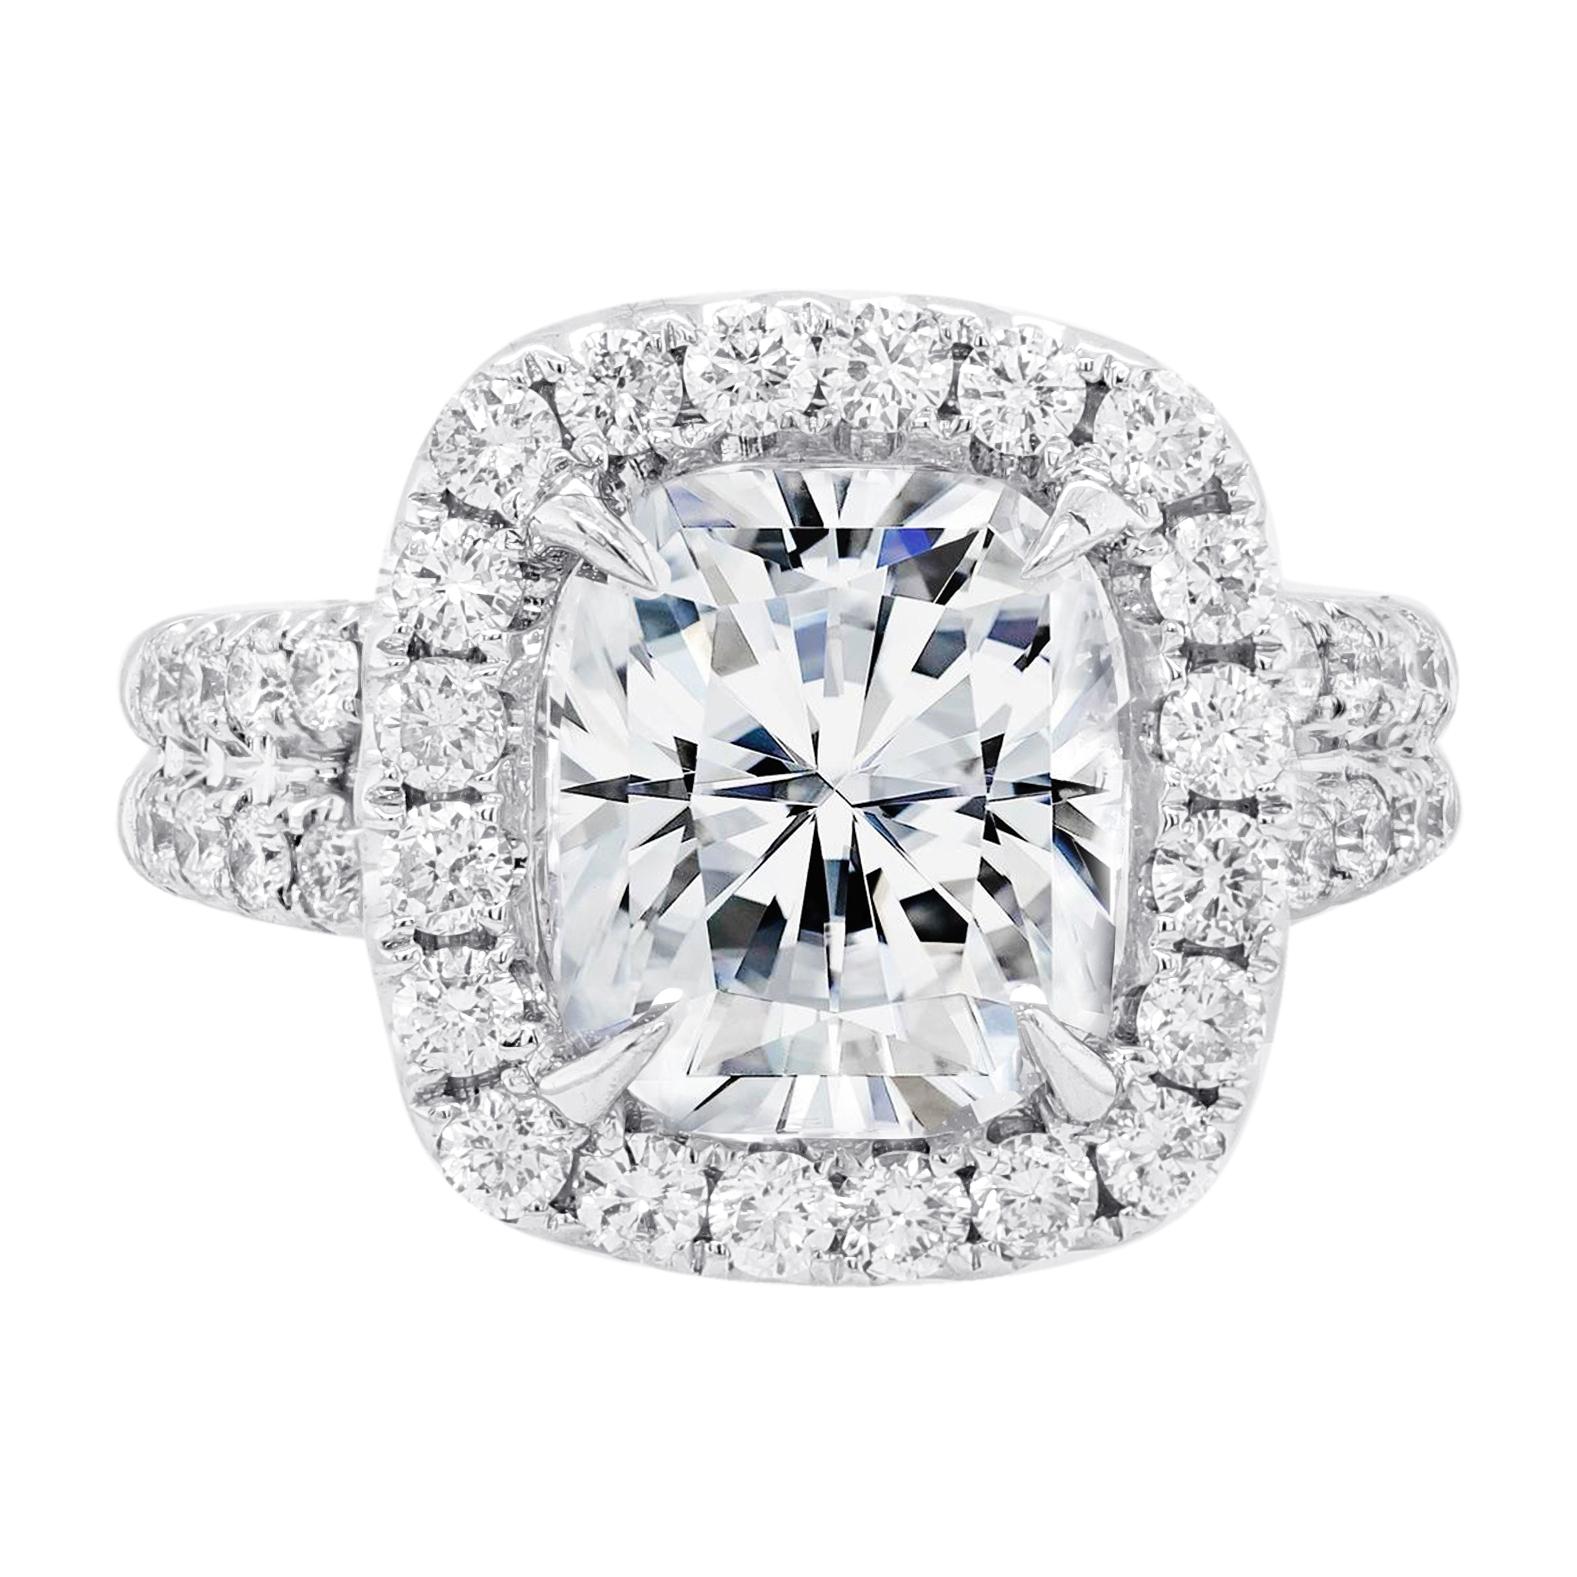 18kt white gold diamond engagement ring with GIA certified center (4.72 ct j, si1 cushion cut-radc631) with round diamonds all the way around and split shank setting, features 1.51cts of diamonds (er18570-1)
